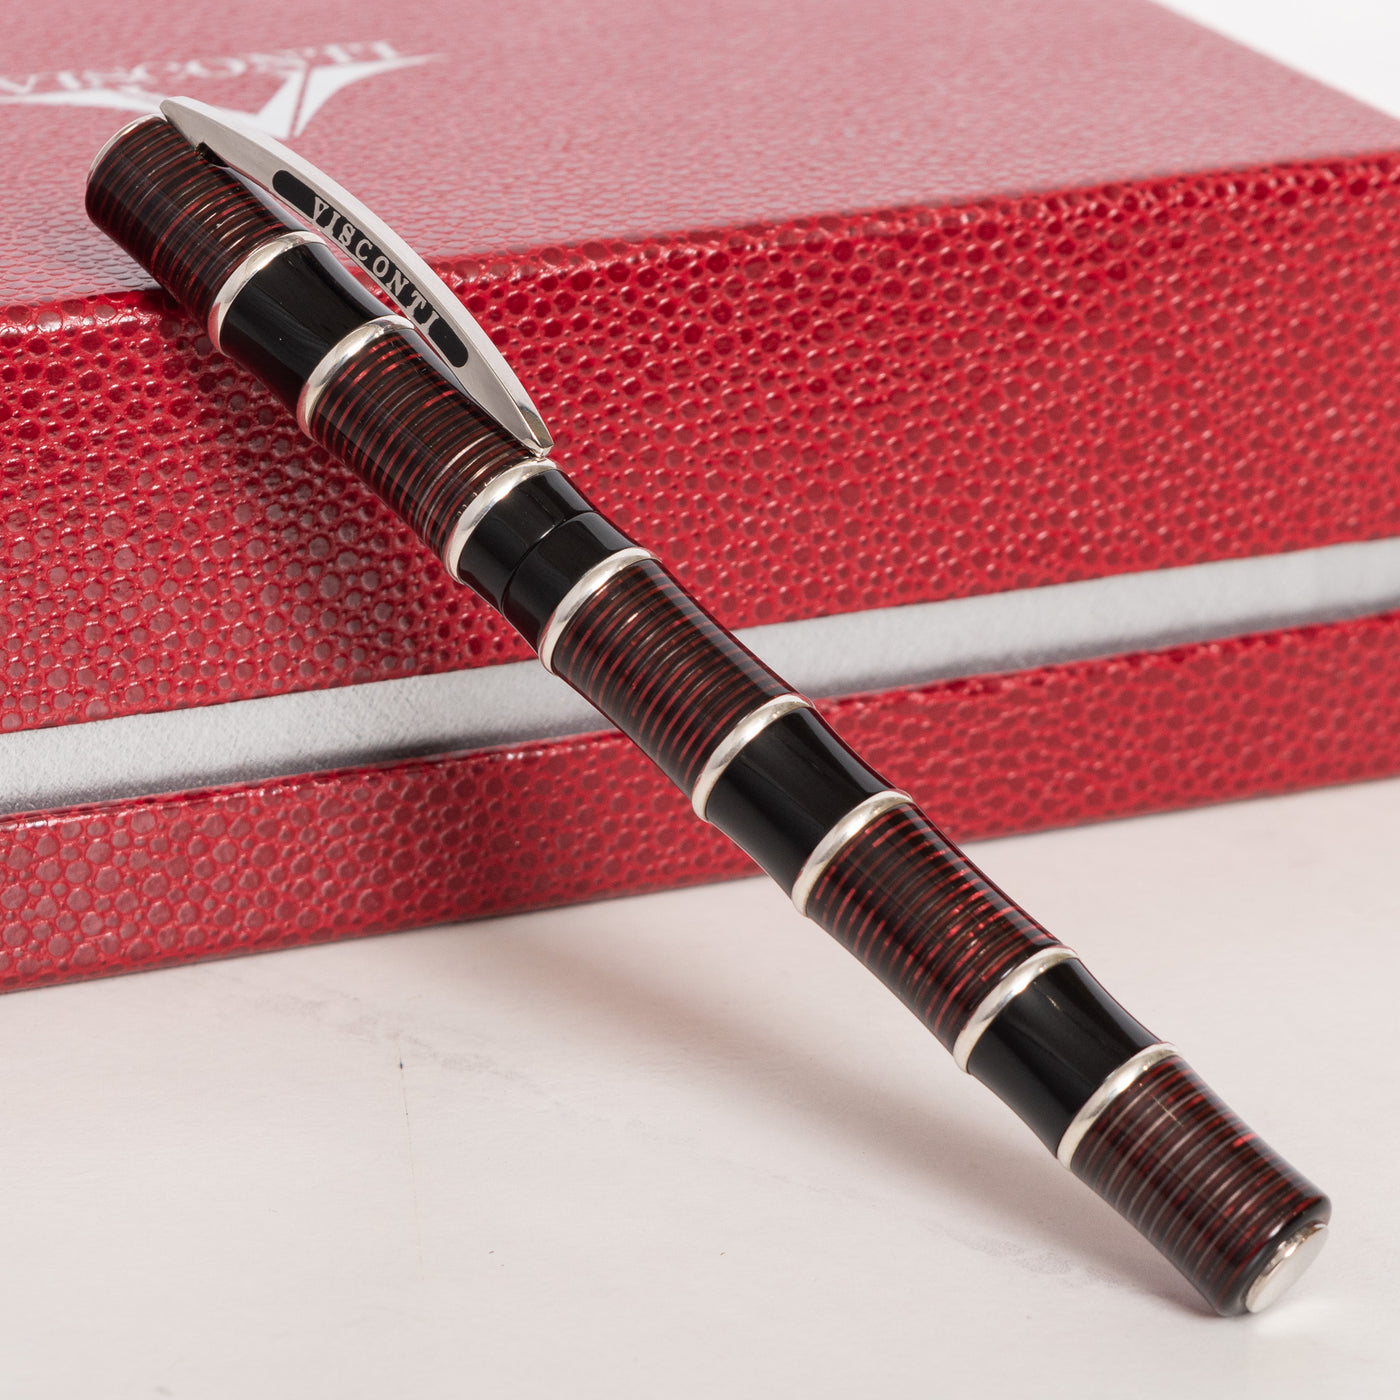 Visconti Asia Bamboo Red Celluloid Fountain Pen Capped